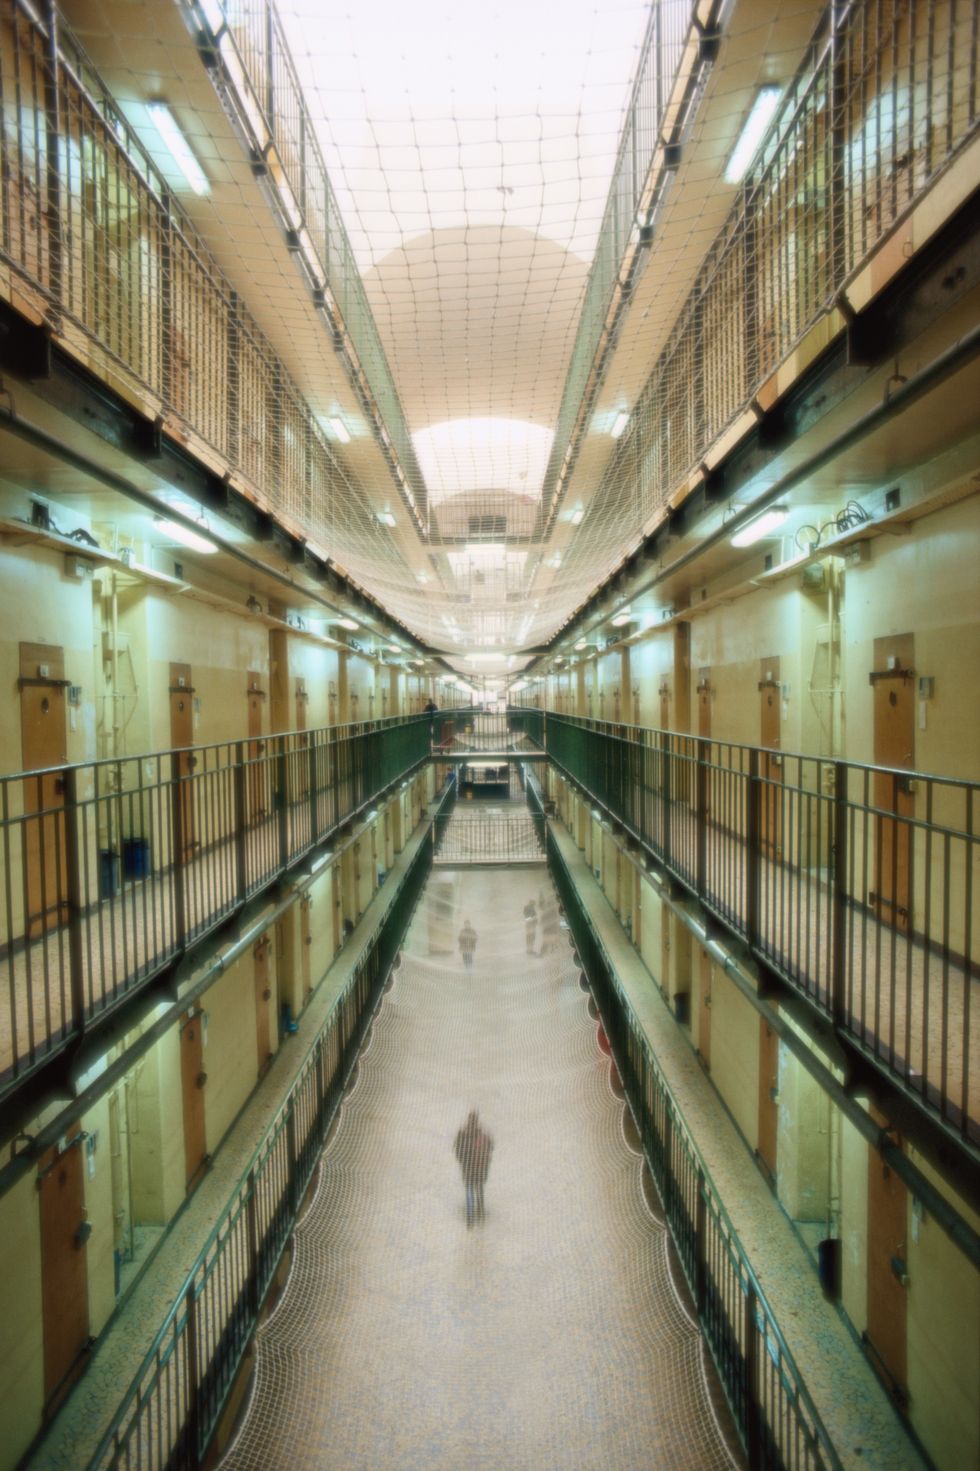 jail cells in a mass incarceration prison